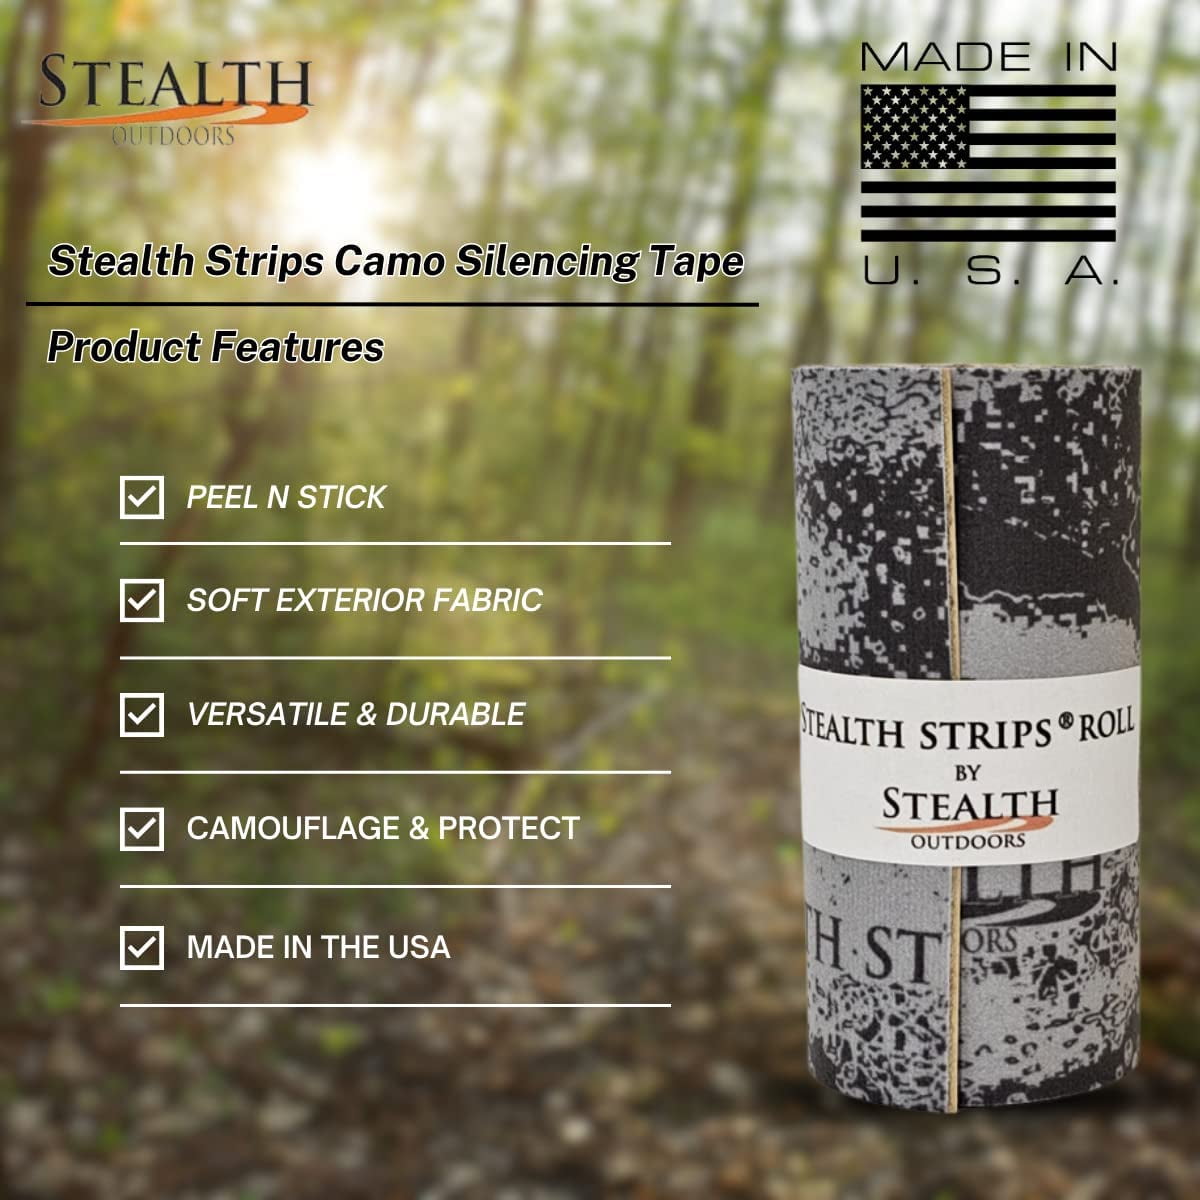 Stealth Strips® Rolls - Camo Silencing Tape - Silence Hunting Gear